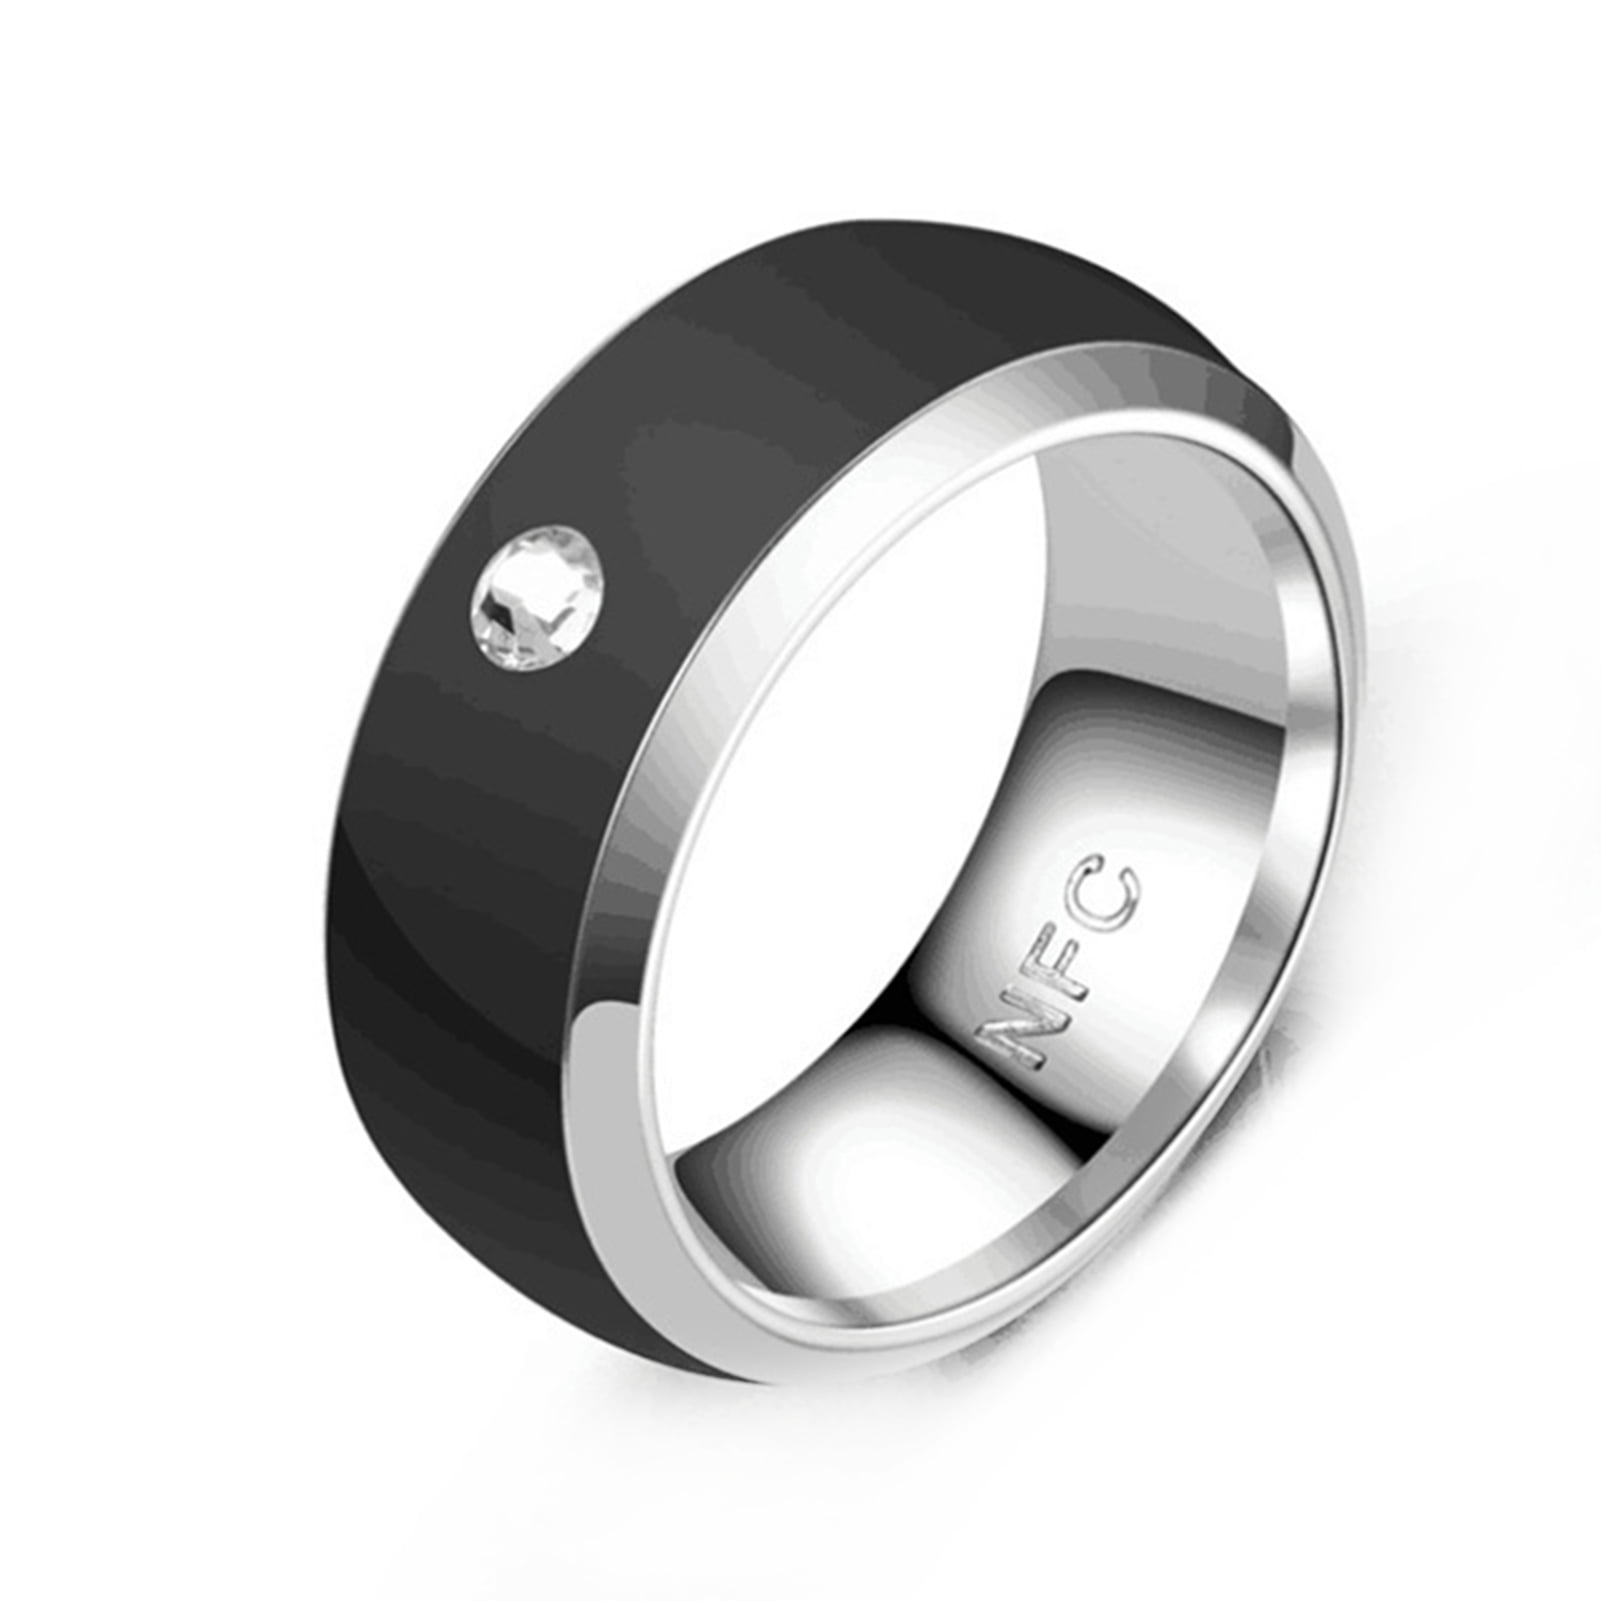 Smart Ring Wearable Technology Waterproof Unisex NFC Phone Smart  Accessories for Couples 6-13 - Walmart.com